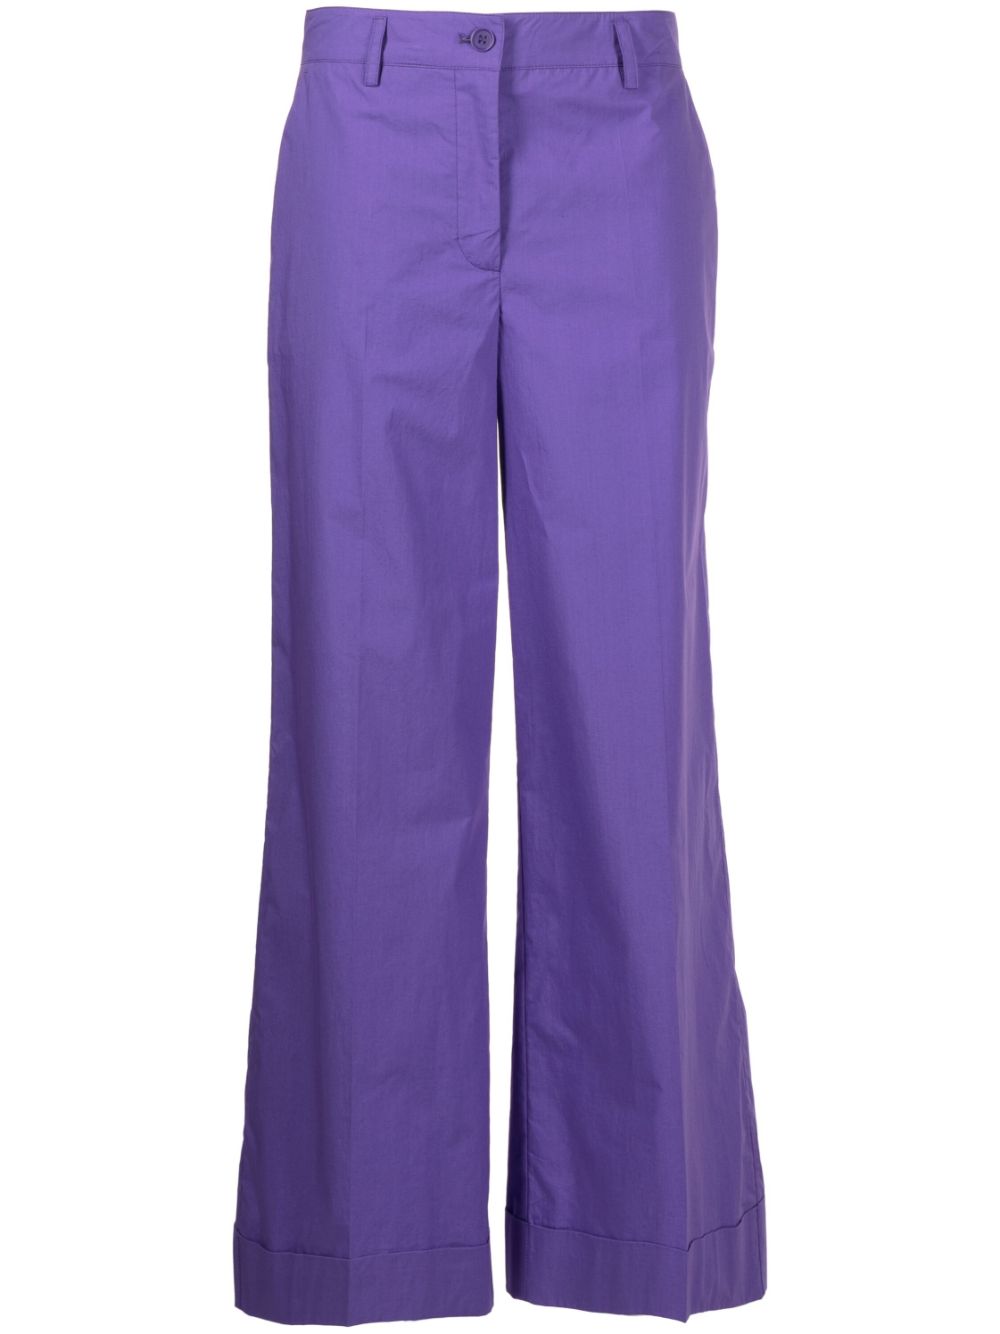 P.A.R.O.S.H MID-RISE WIDE-LEG TROUSERS